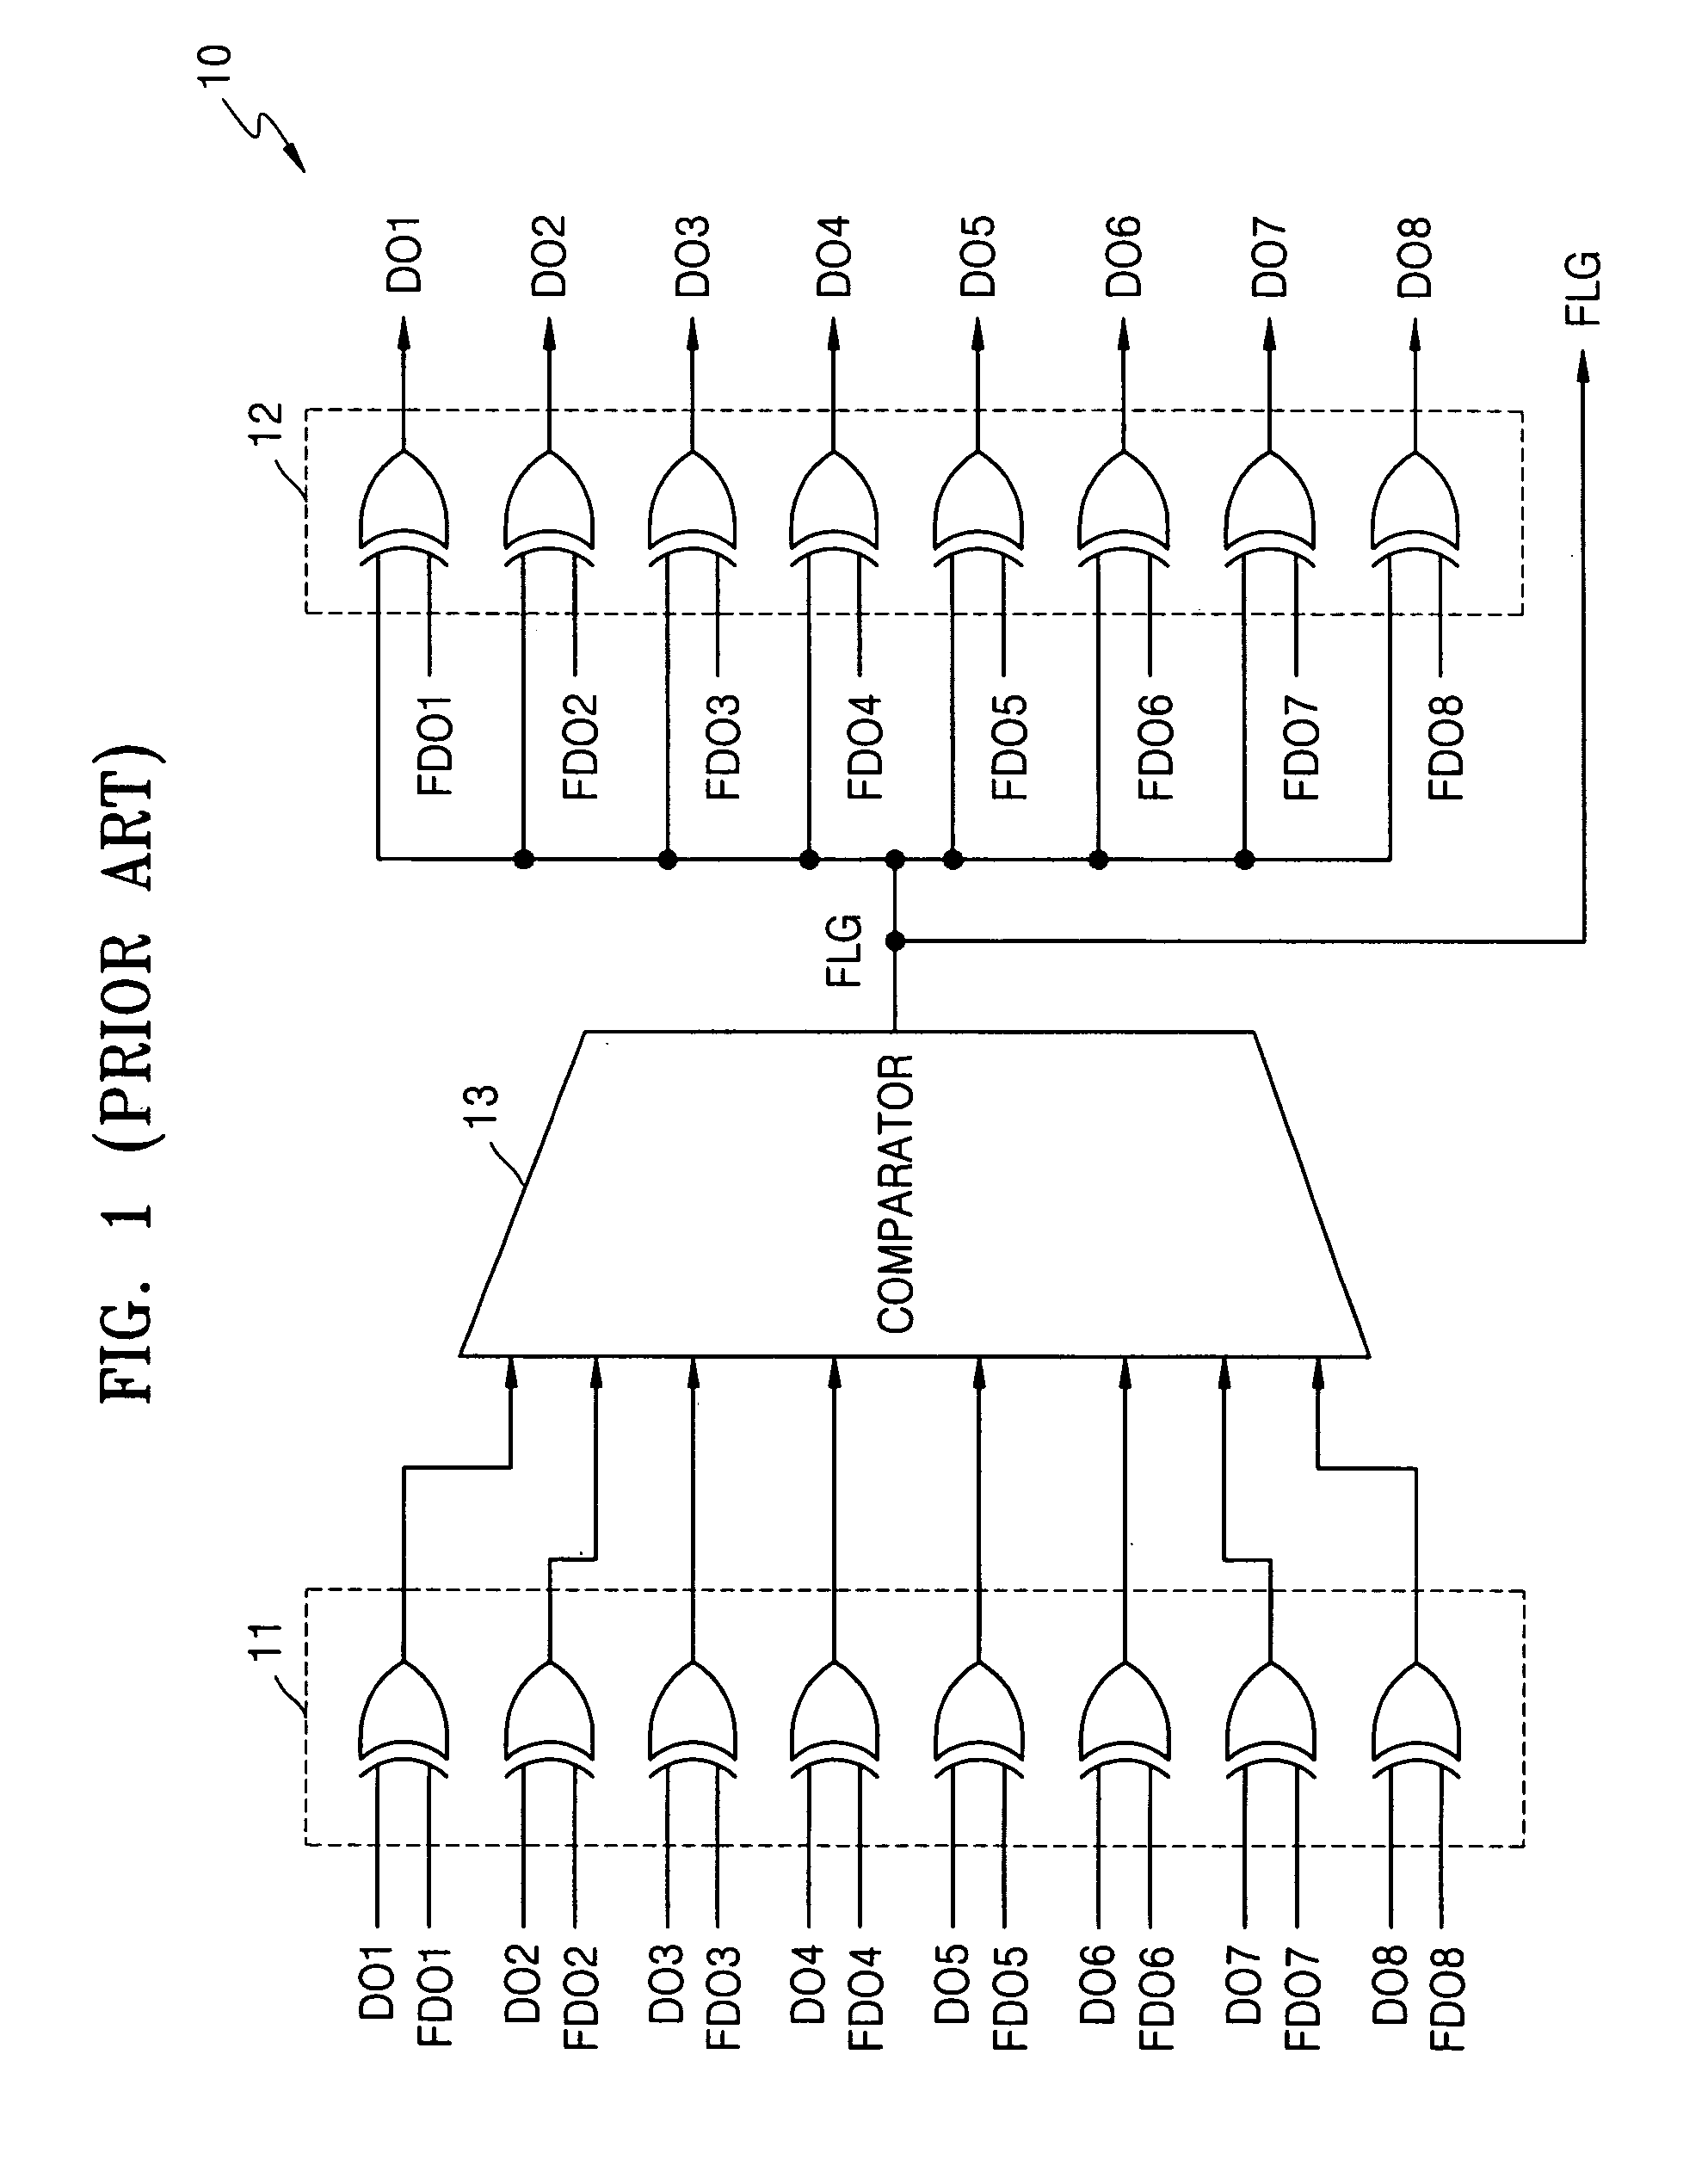 Integrated circuit devices having data inversion circuits therein with multi-bit prefetch structures and methods of operating same